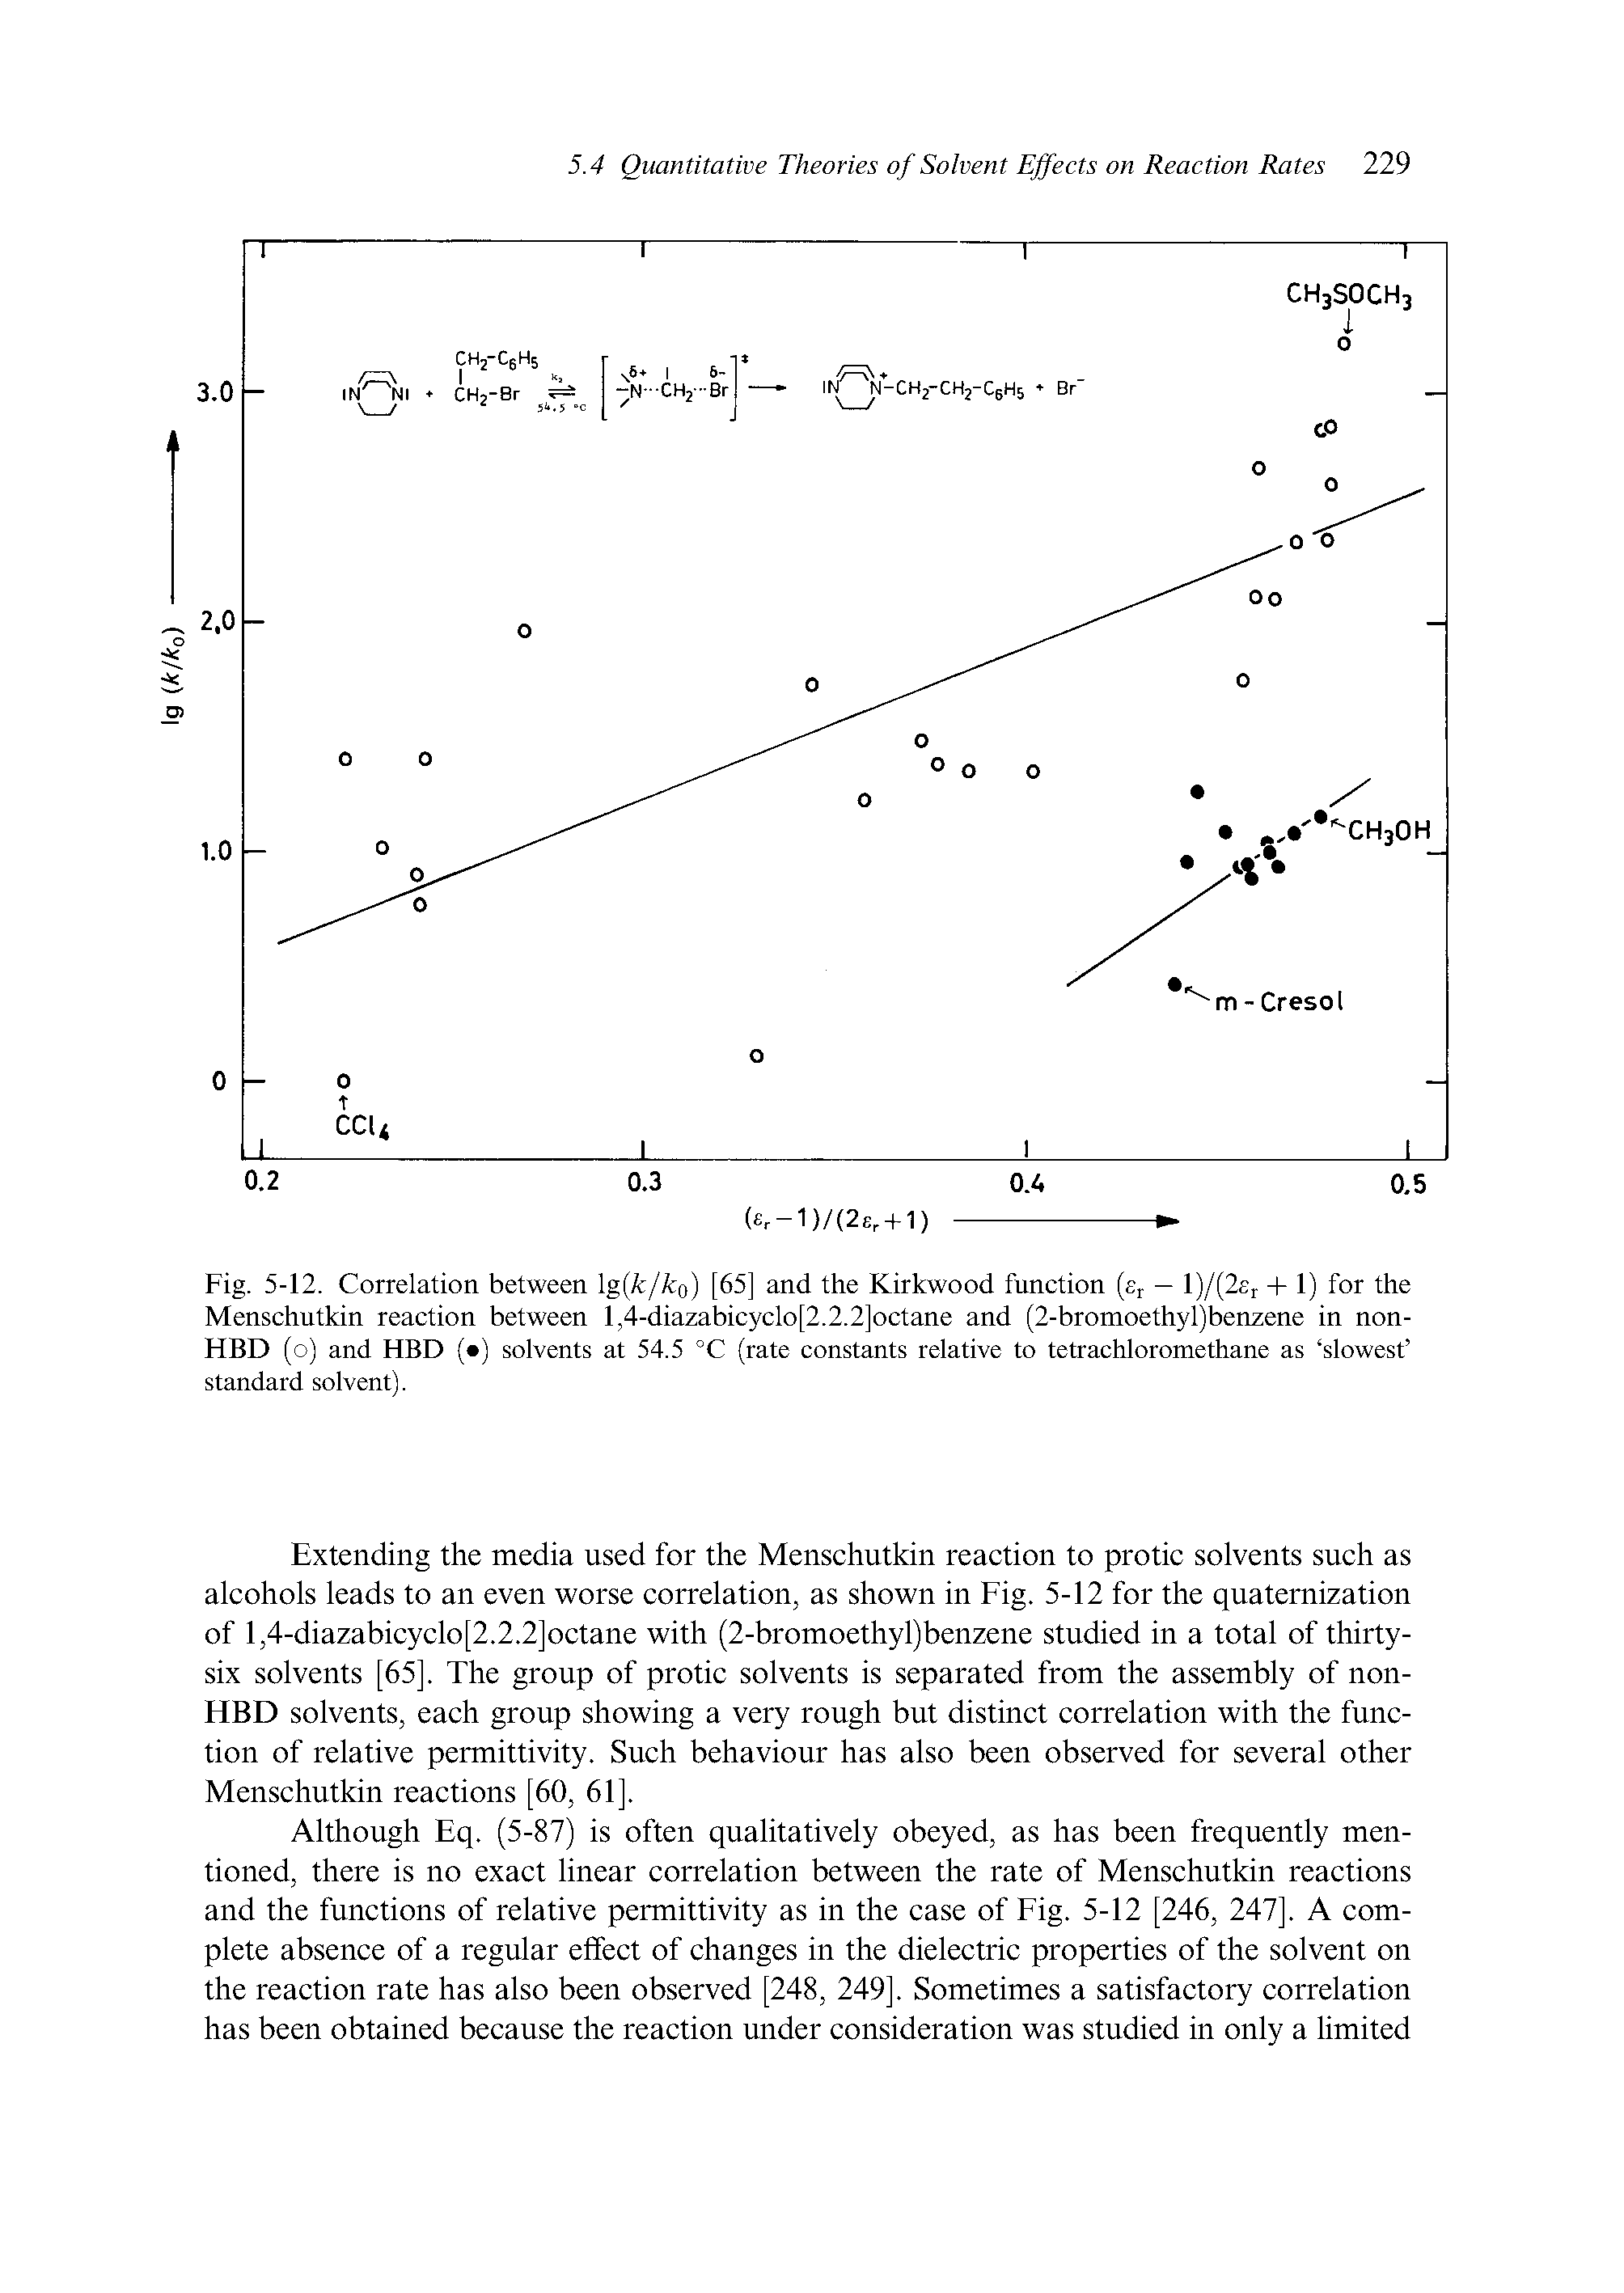 Fig. 5-12. Correlation between lg k/ko) [65] and the Kirkwood function (cj — l)/(2 j + 1) for the Menschutkin reaction between l,4-diazabicyclo[2.2.2]octane and (2-bromoethyl)benzene in non-FIBD (o) and HBD ( ) solvents at 54.5 °C (rate constants relative to tetrachloromethane as slowest standard solvent).